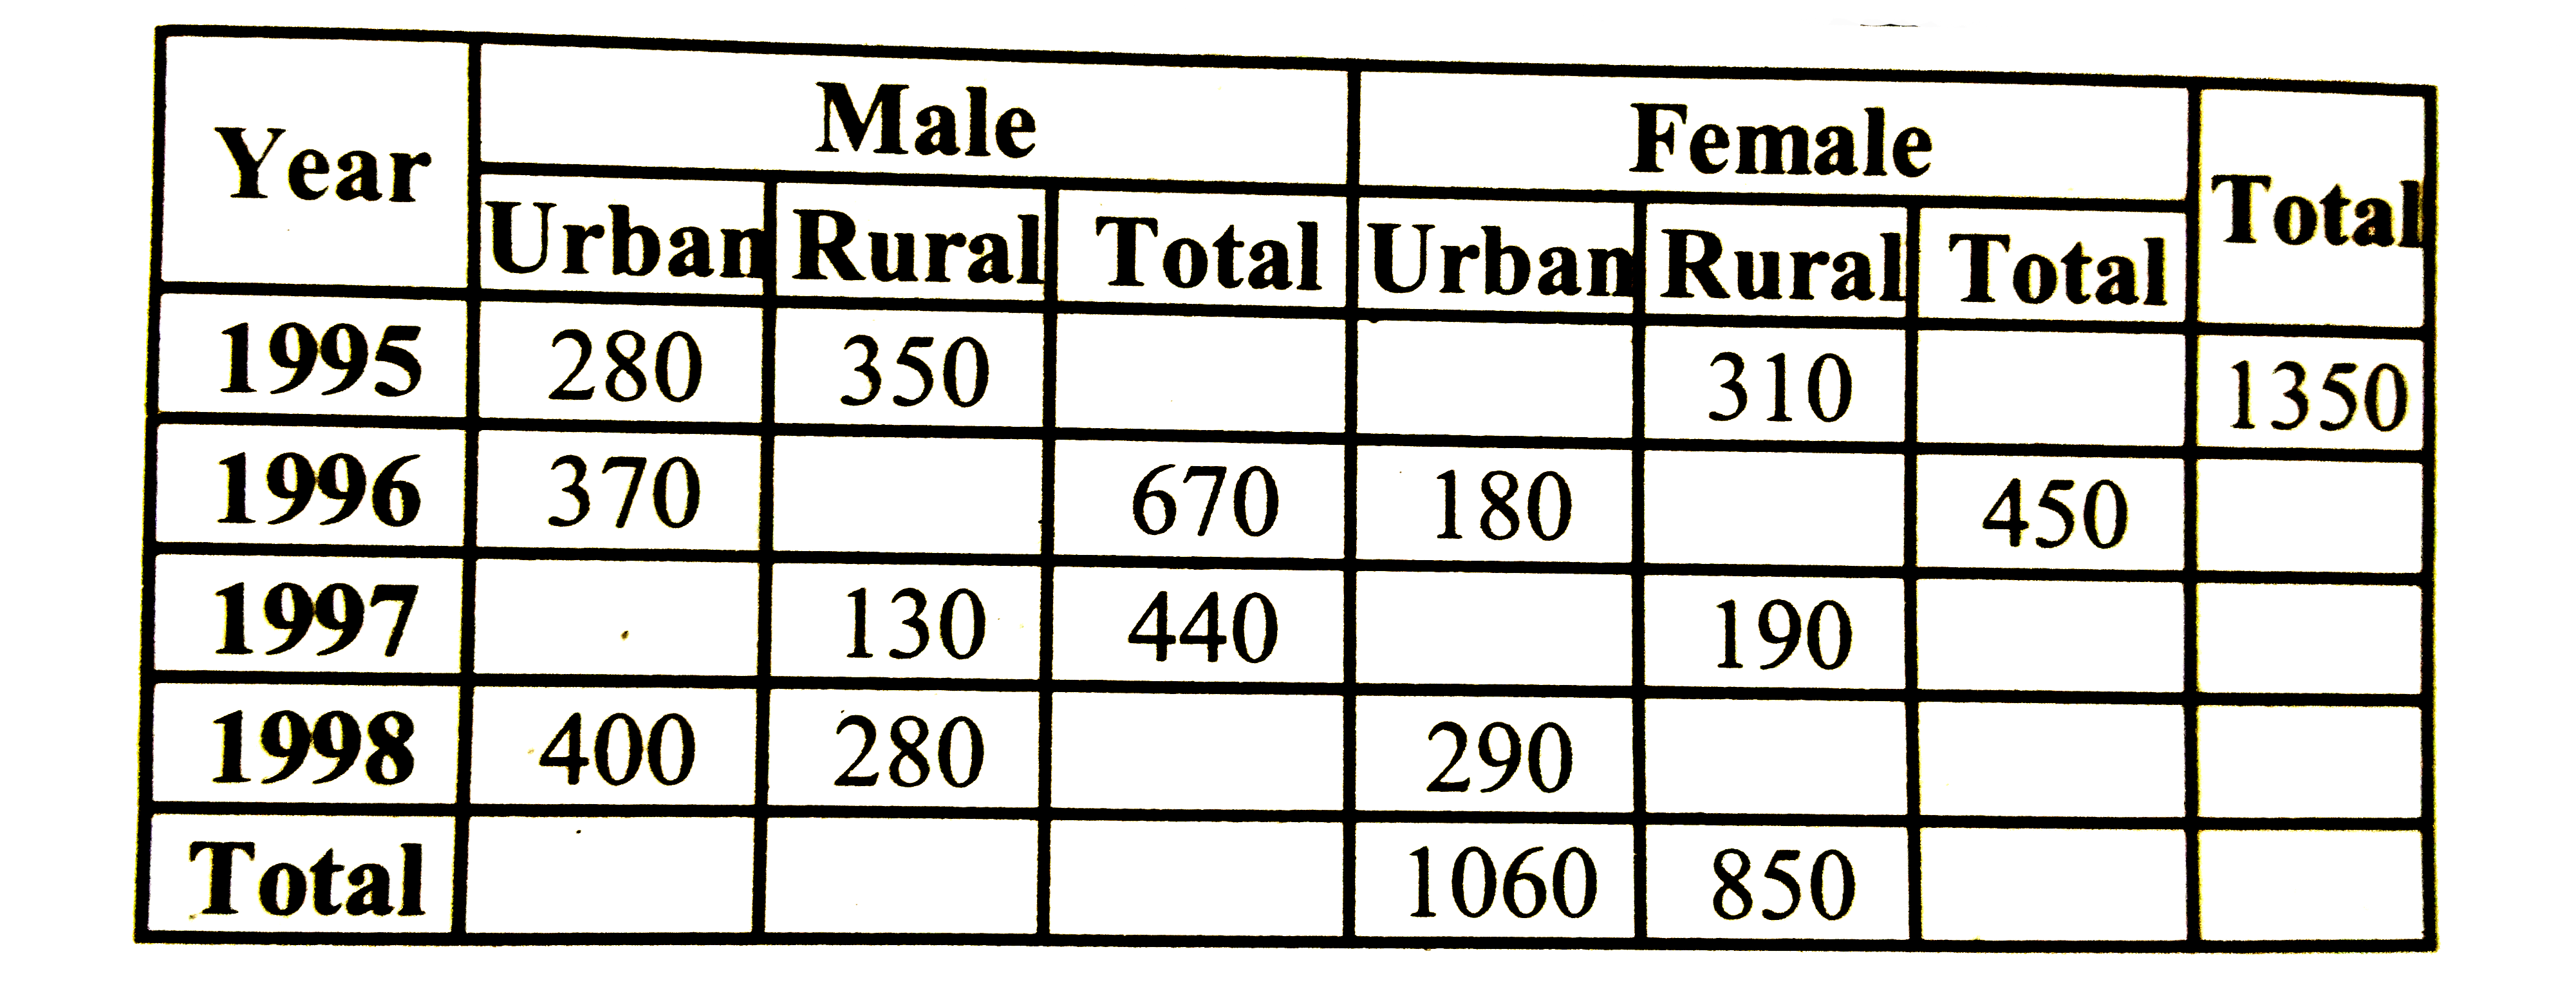 What is the female urban population in the year 1995?